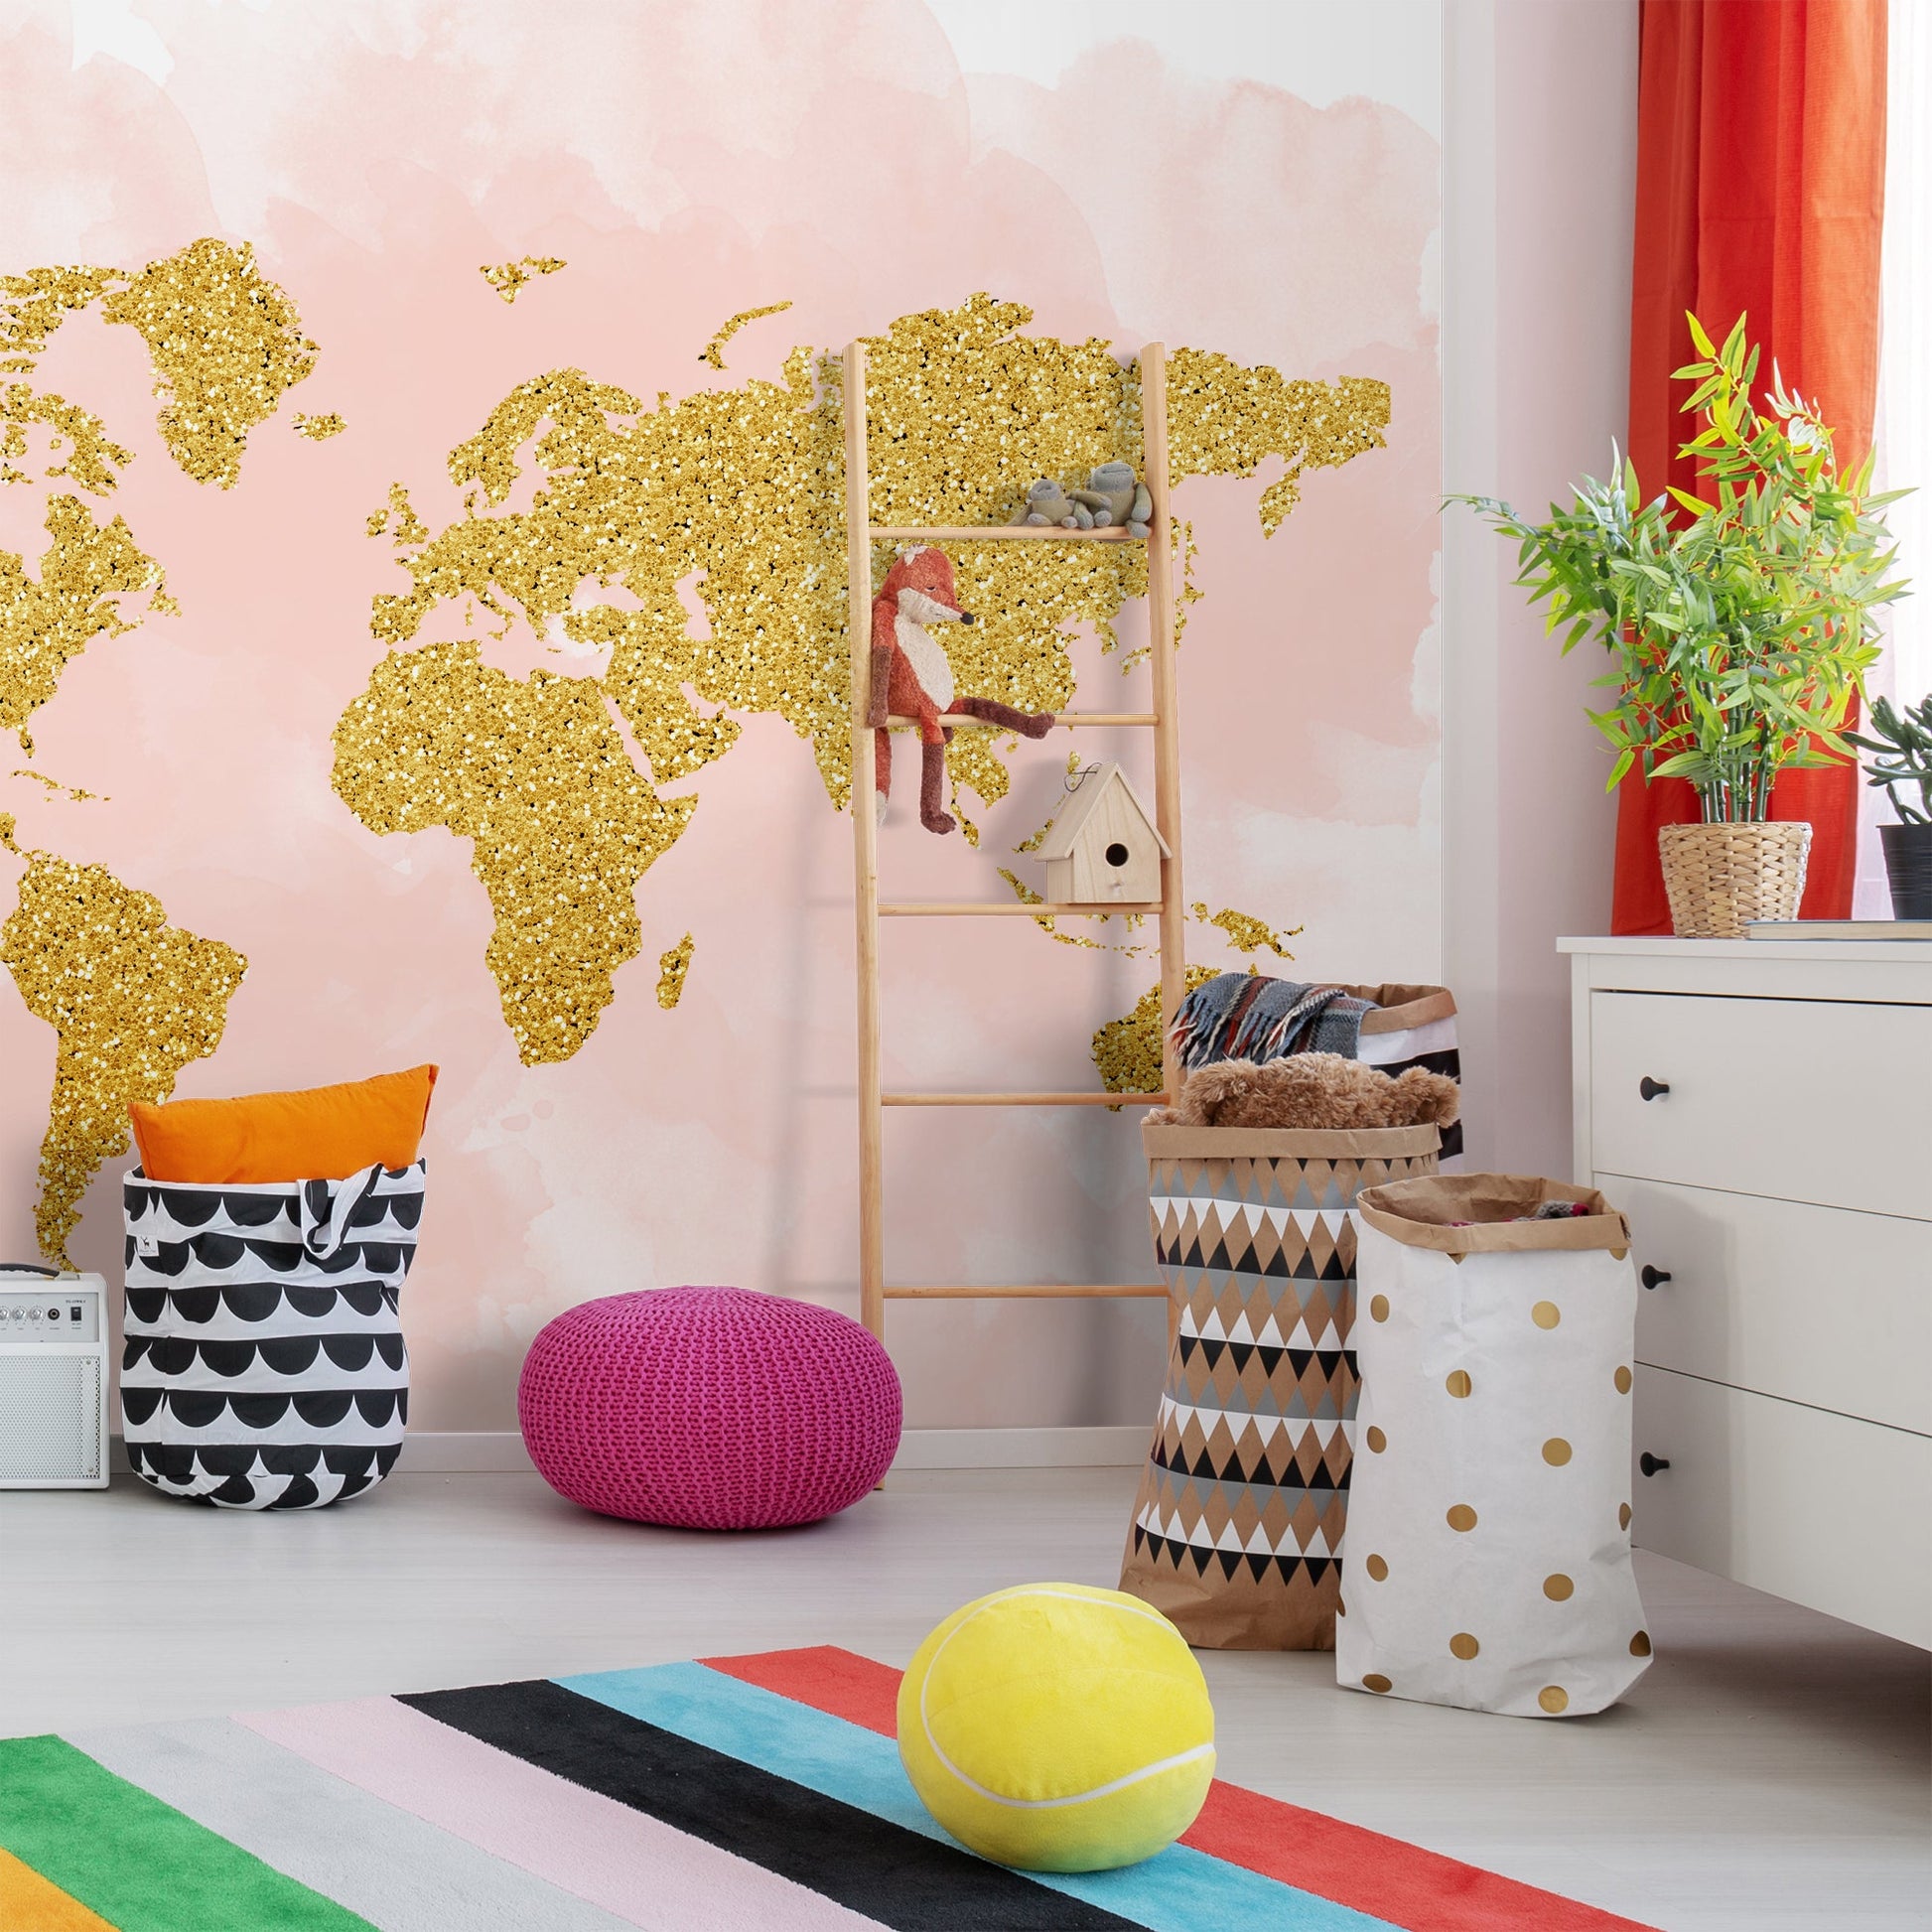 Peel & Stick Wall Mural - World Map 4 By Peach & Gold